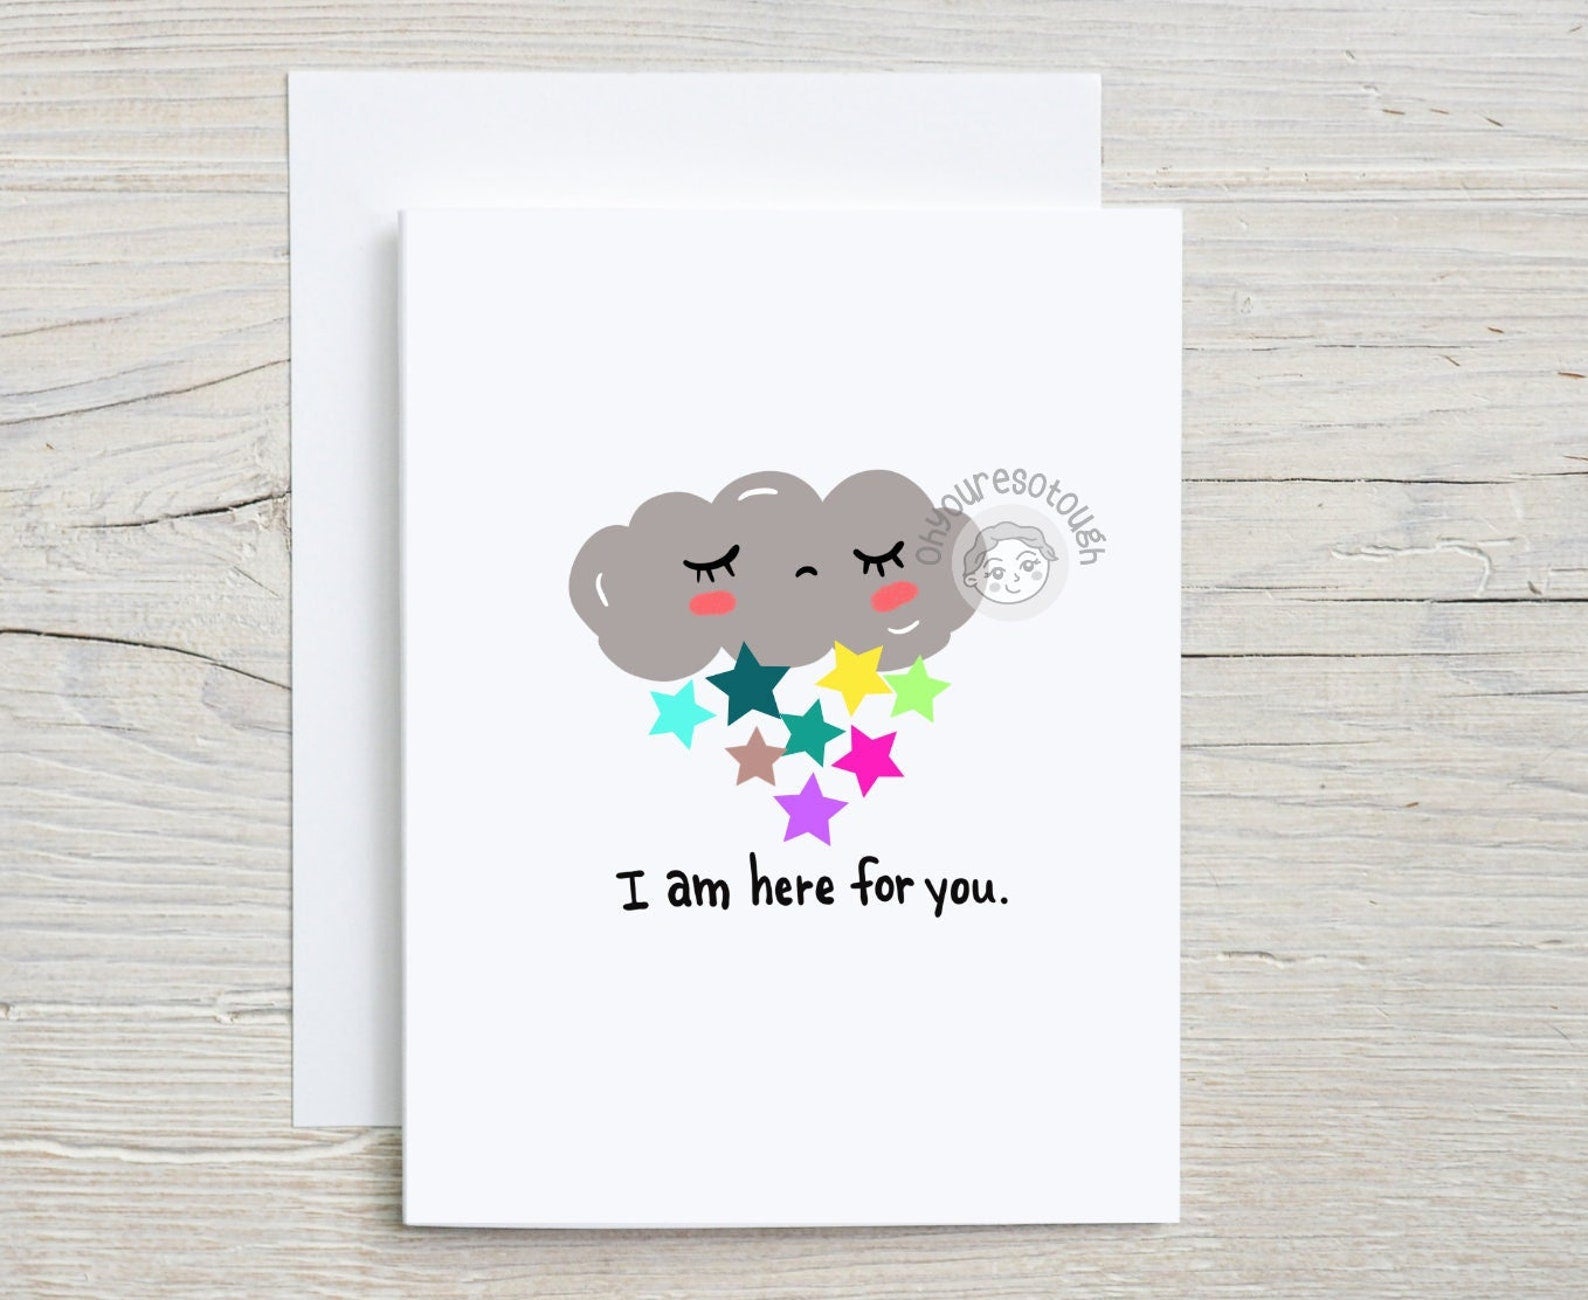 Thinking of You Card - Friendship Support Card - Cute Encouragement Card - Cute Sympathy Card - I Love You Card - Just Because Card